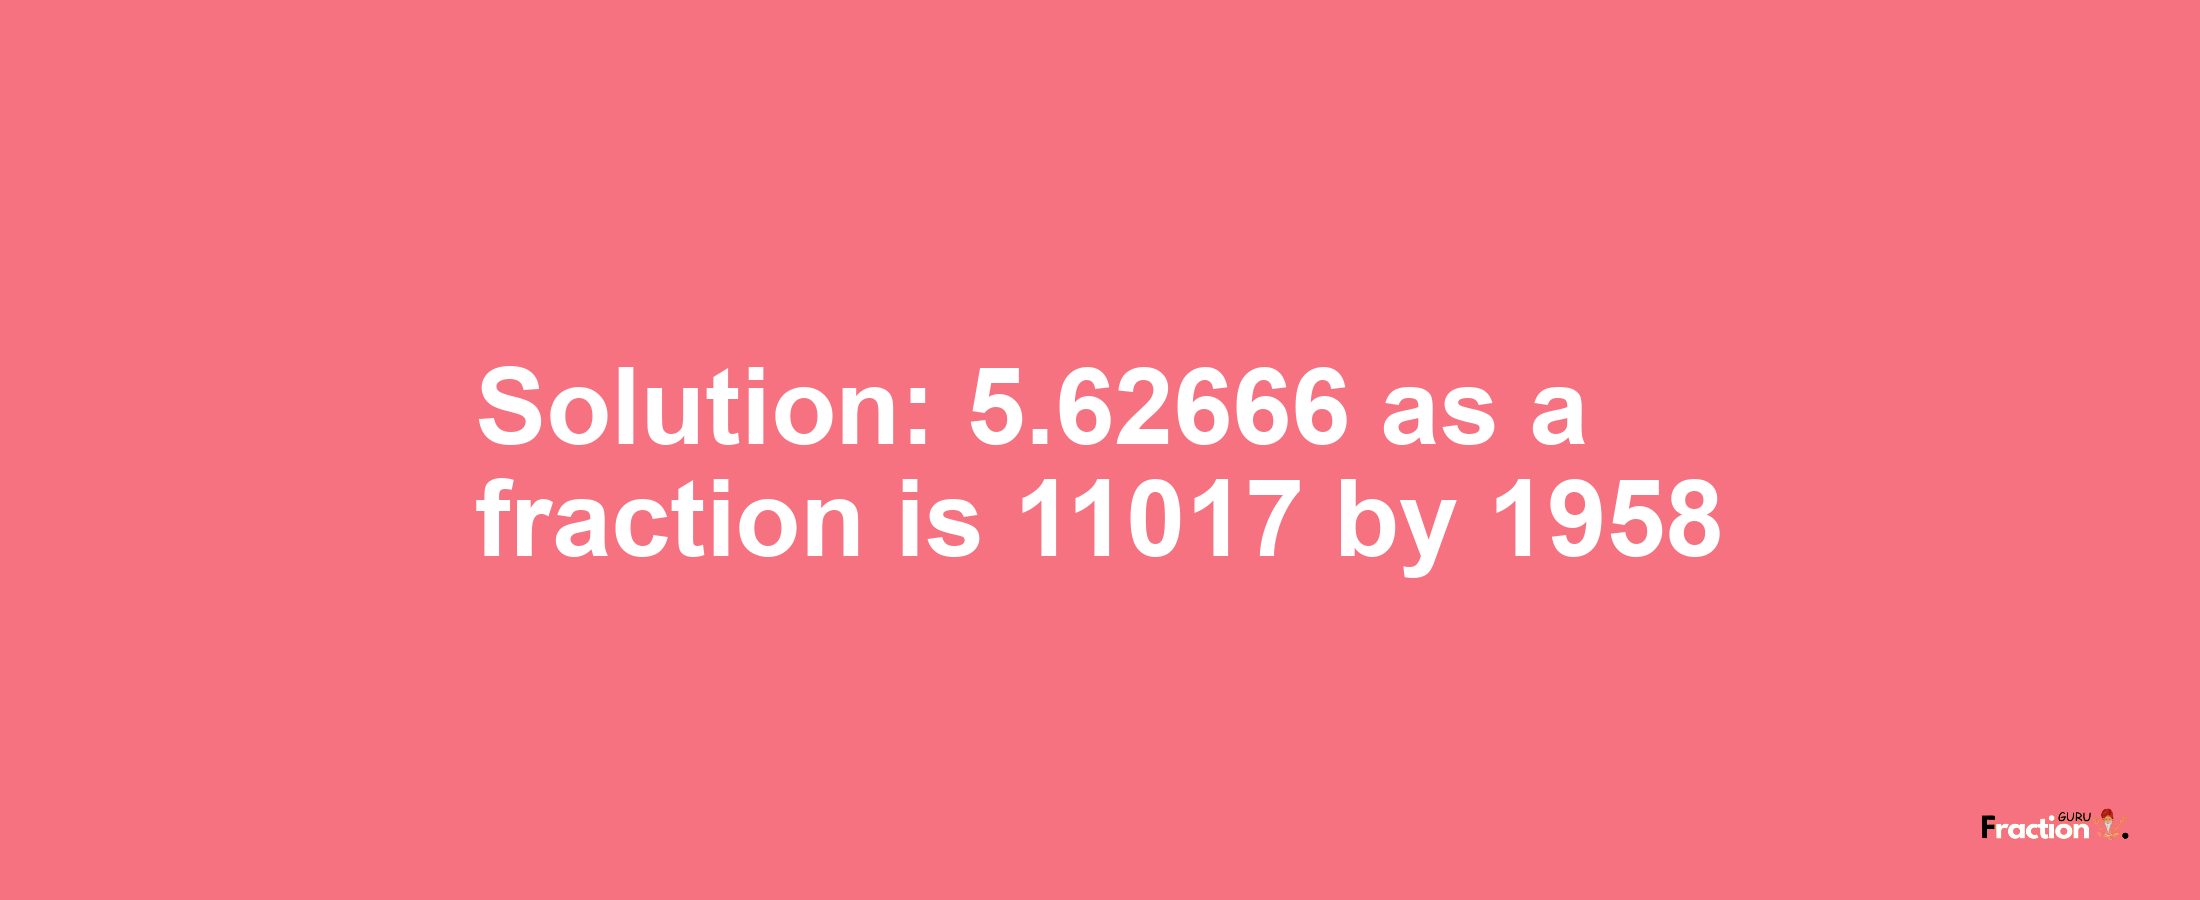 Solution:5.62666 as a fraction is 11017/1958